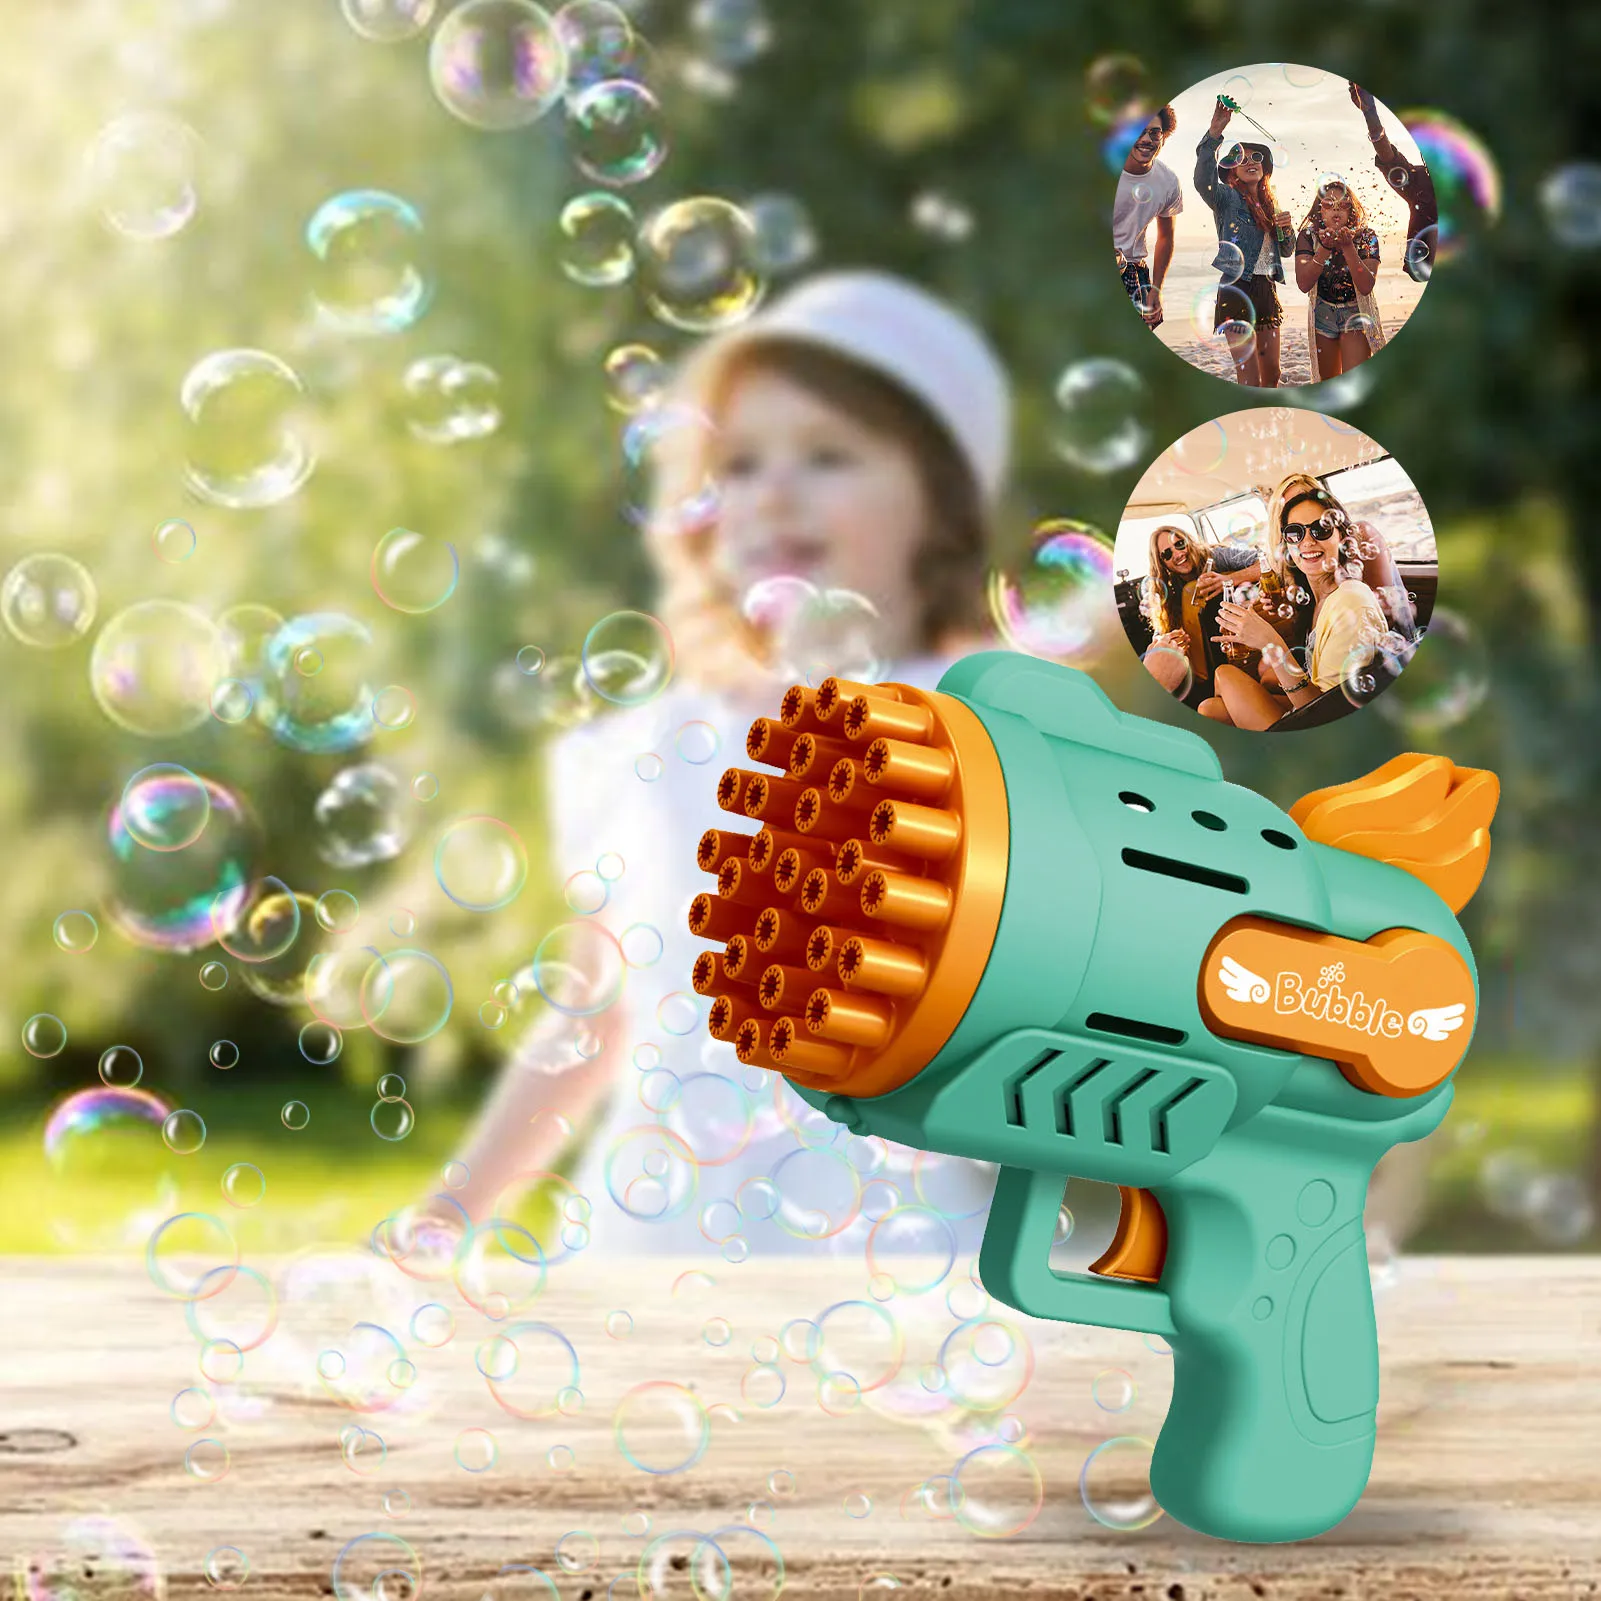 Bubble Gun Rocket 29 Hole Automatic Soap Bubbles Machine Outdoor Toy for Boys Birthday Gifts Wedding Party Children Summer Gift